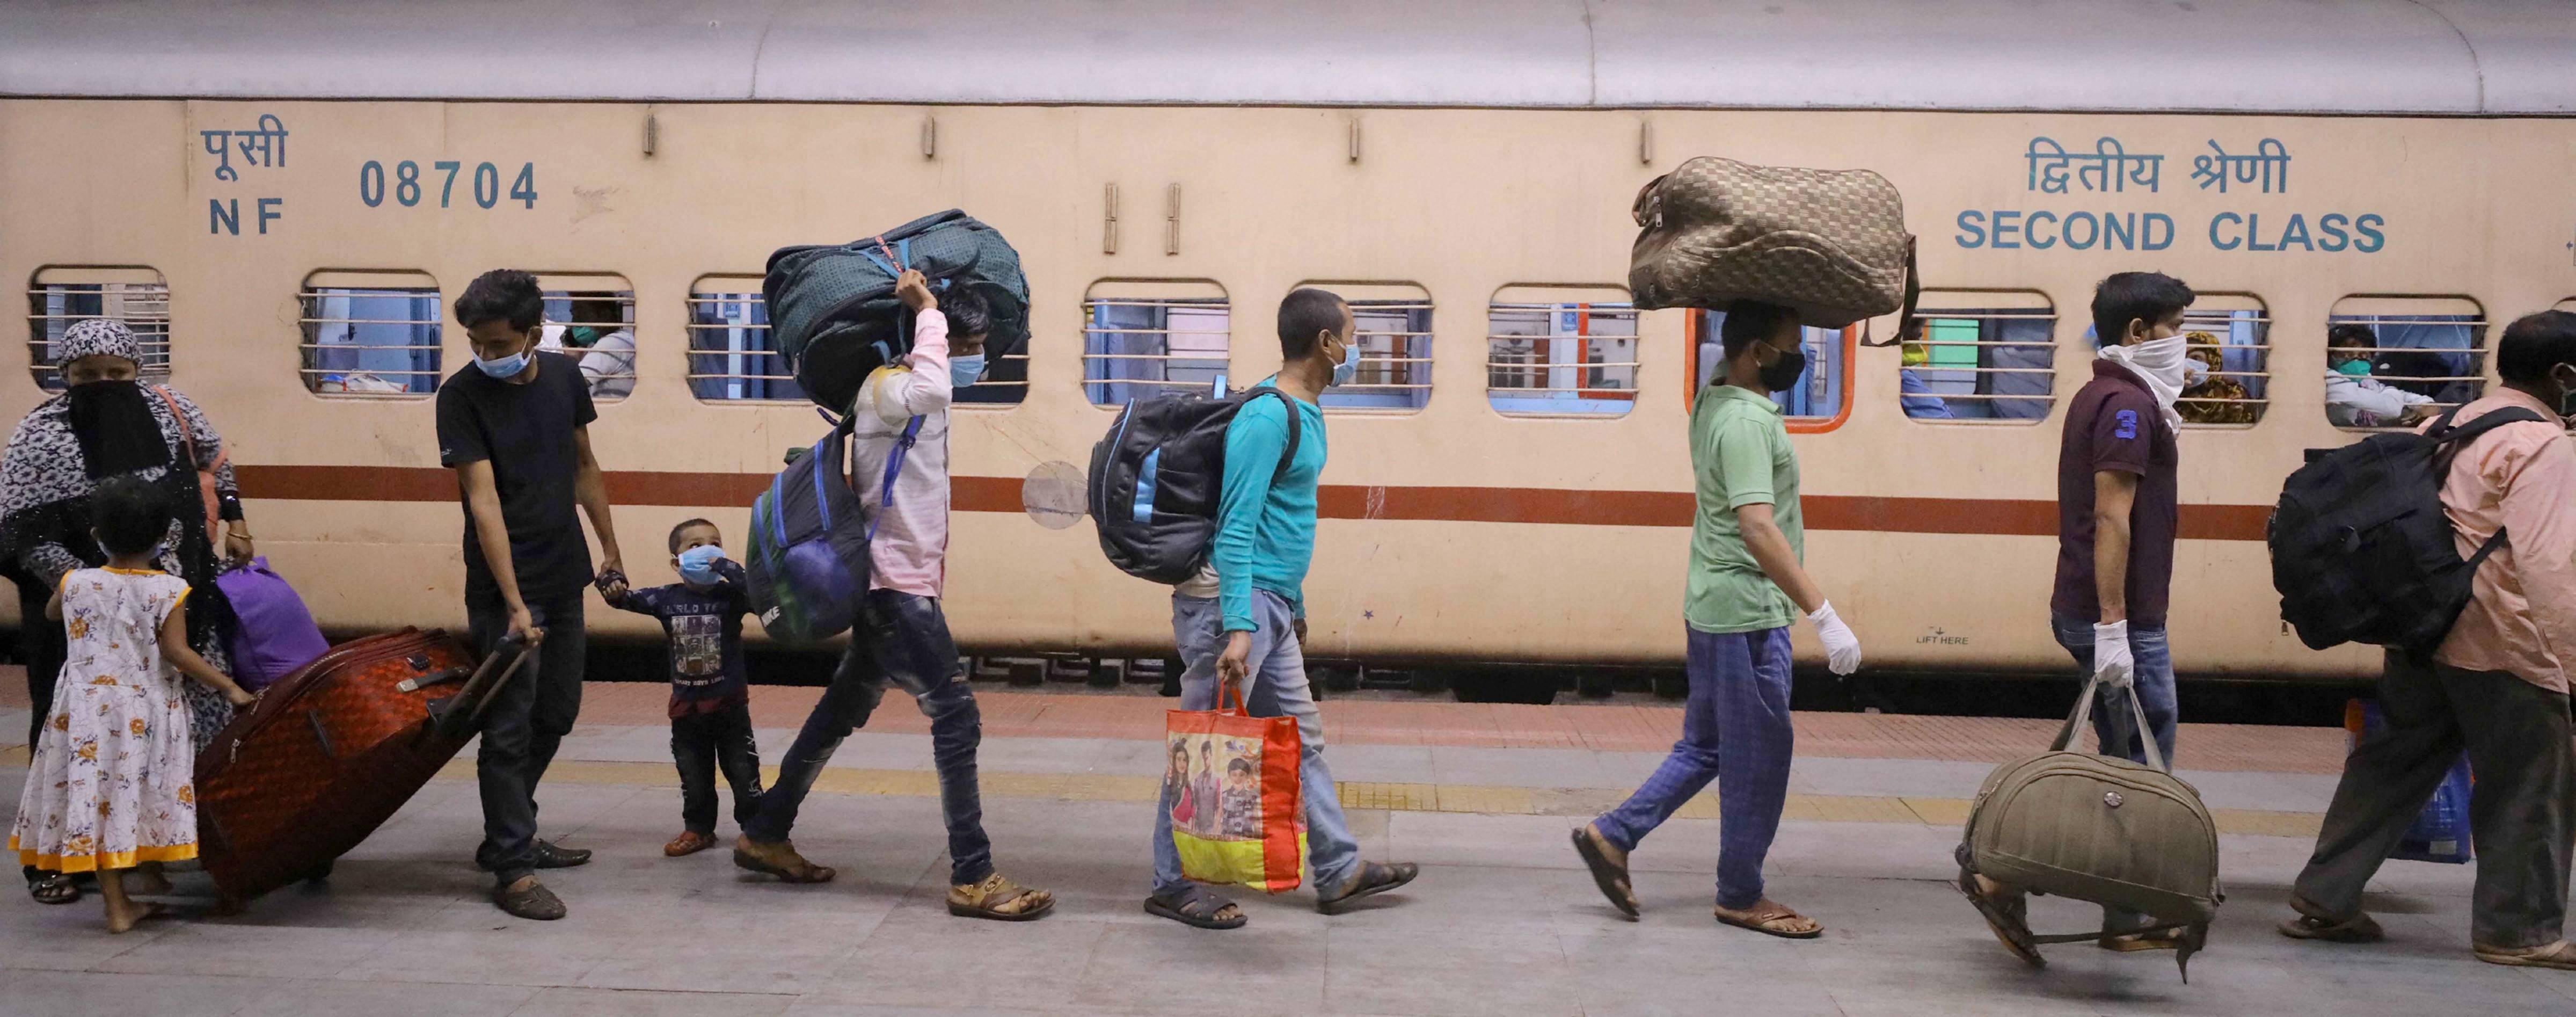 Passengers, traveling from Mumbai, arrive at Howrah Station by a special train during the fourth phase of Covid-19 nationwide lockdown, in Calcutta, Thursday, May 28, 2020